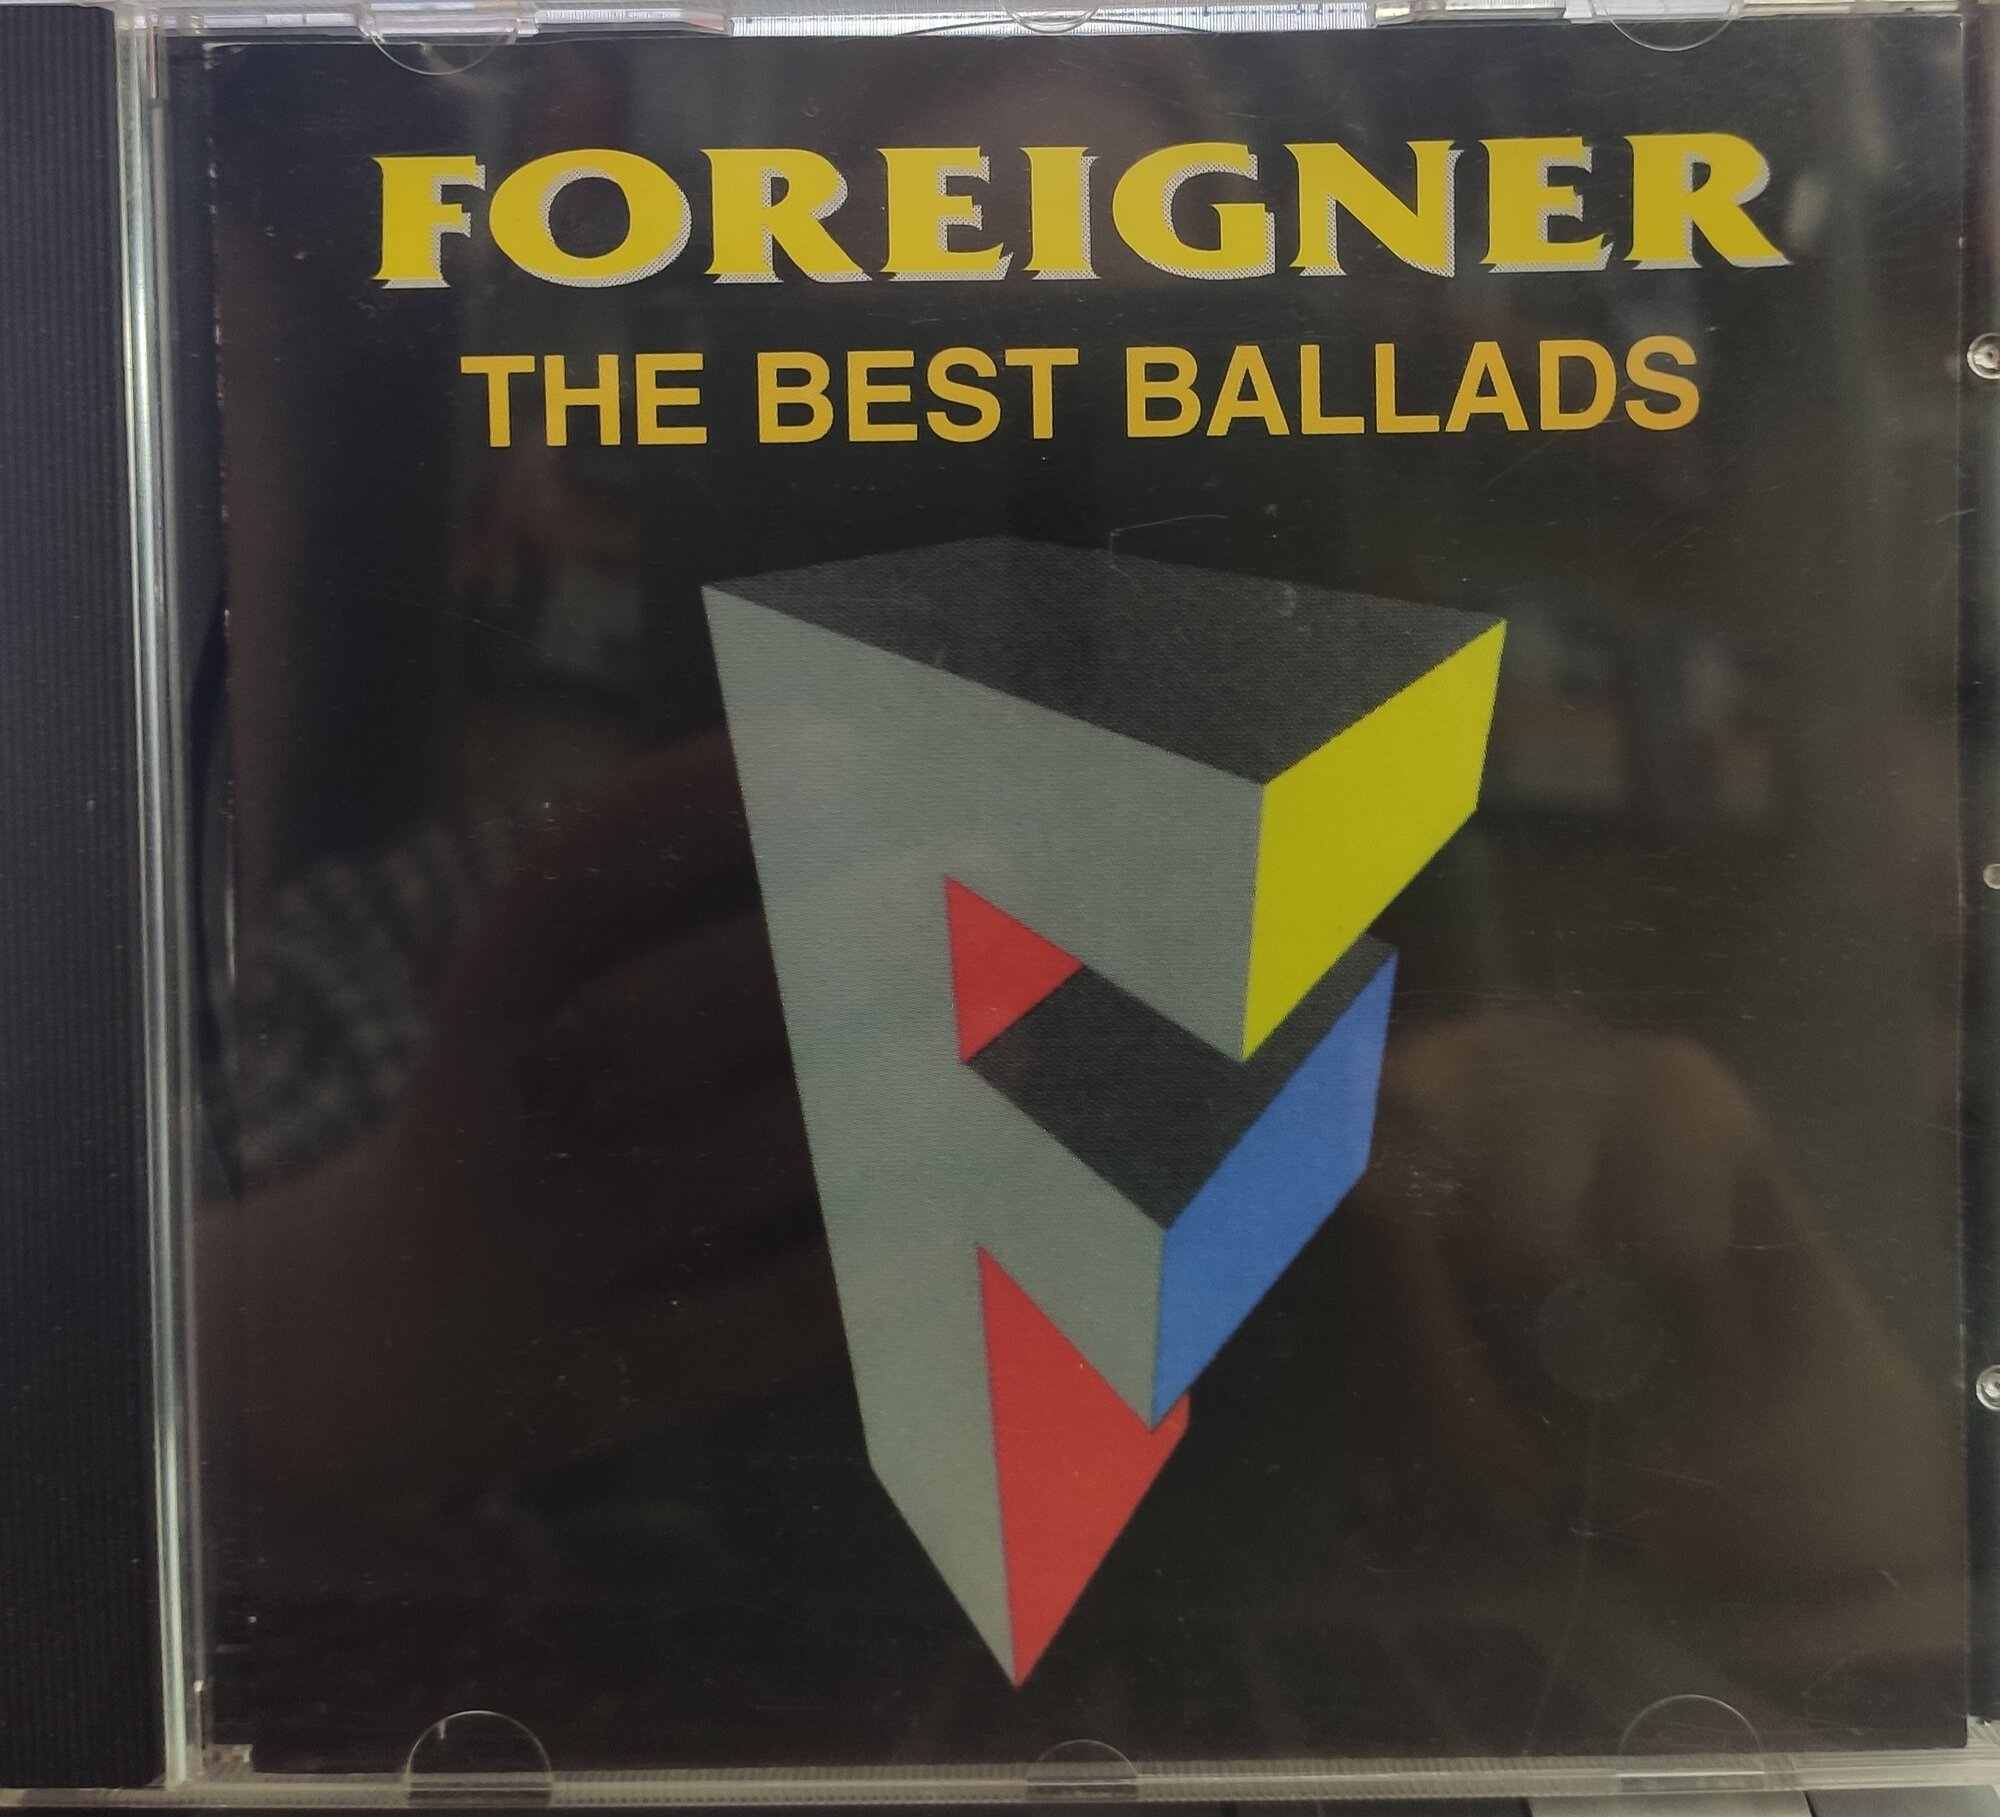 Foreigner - The Very Best Of Foreigner (CD-Audio Russia)